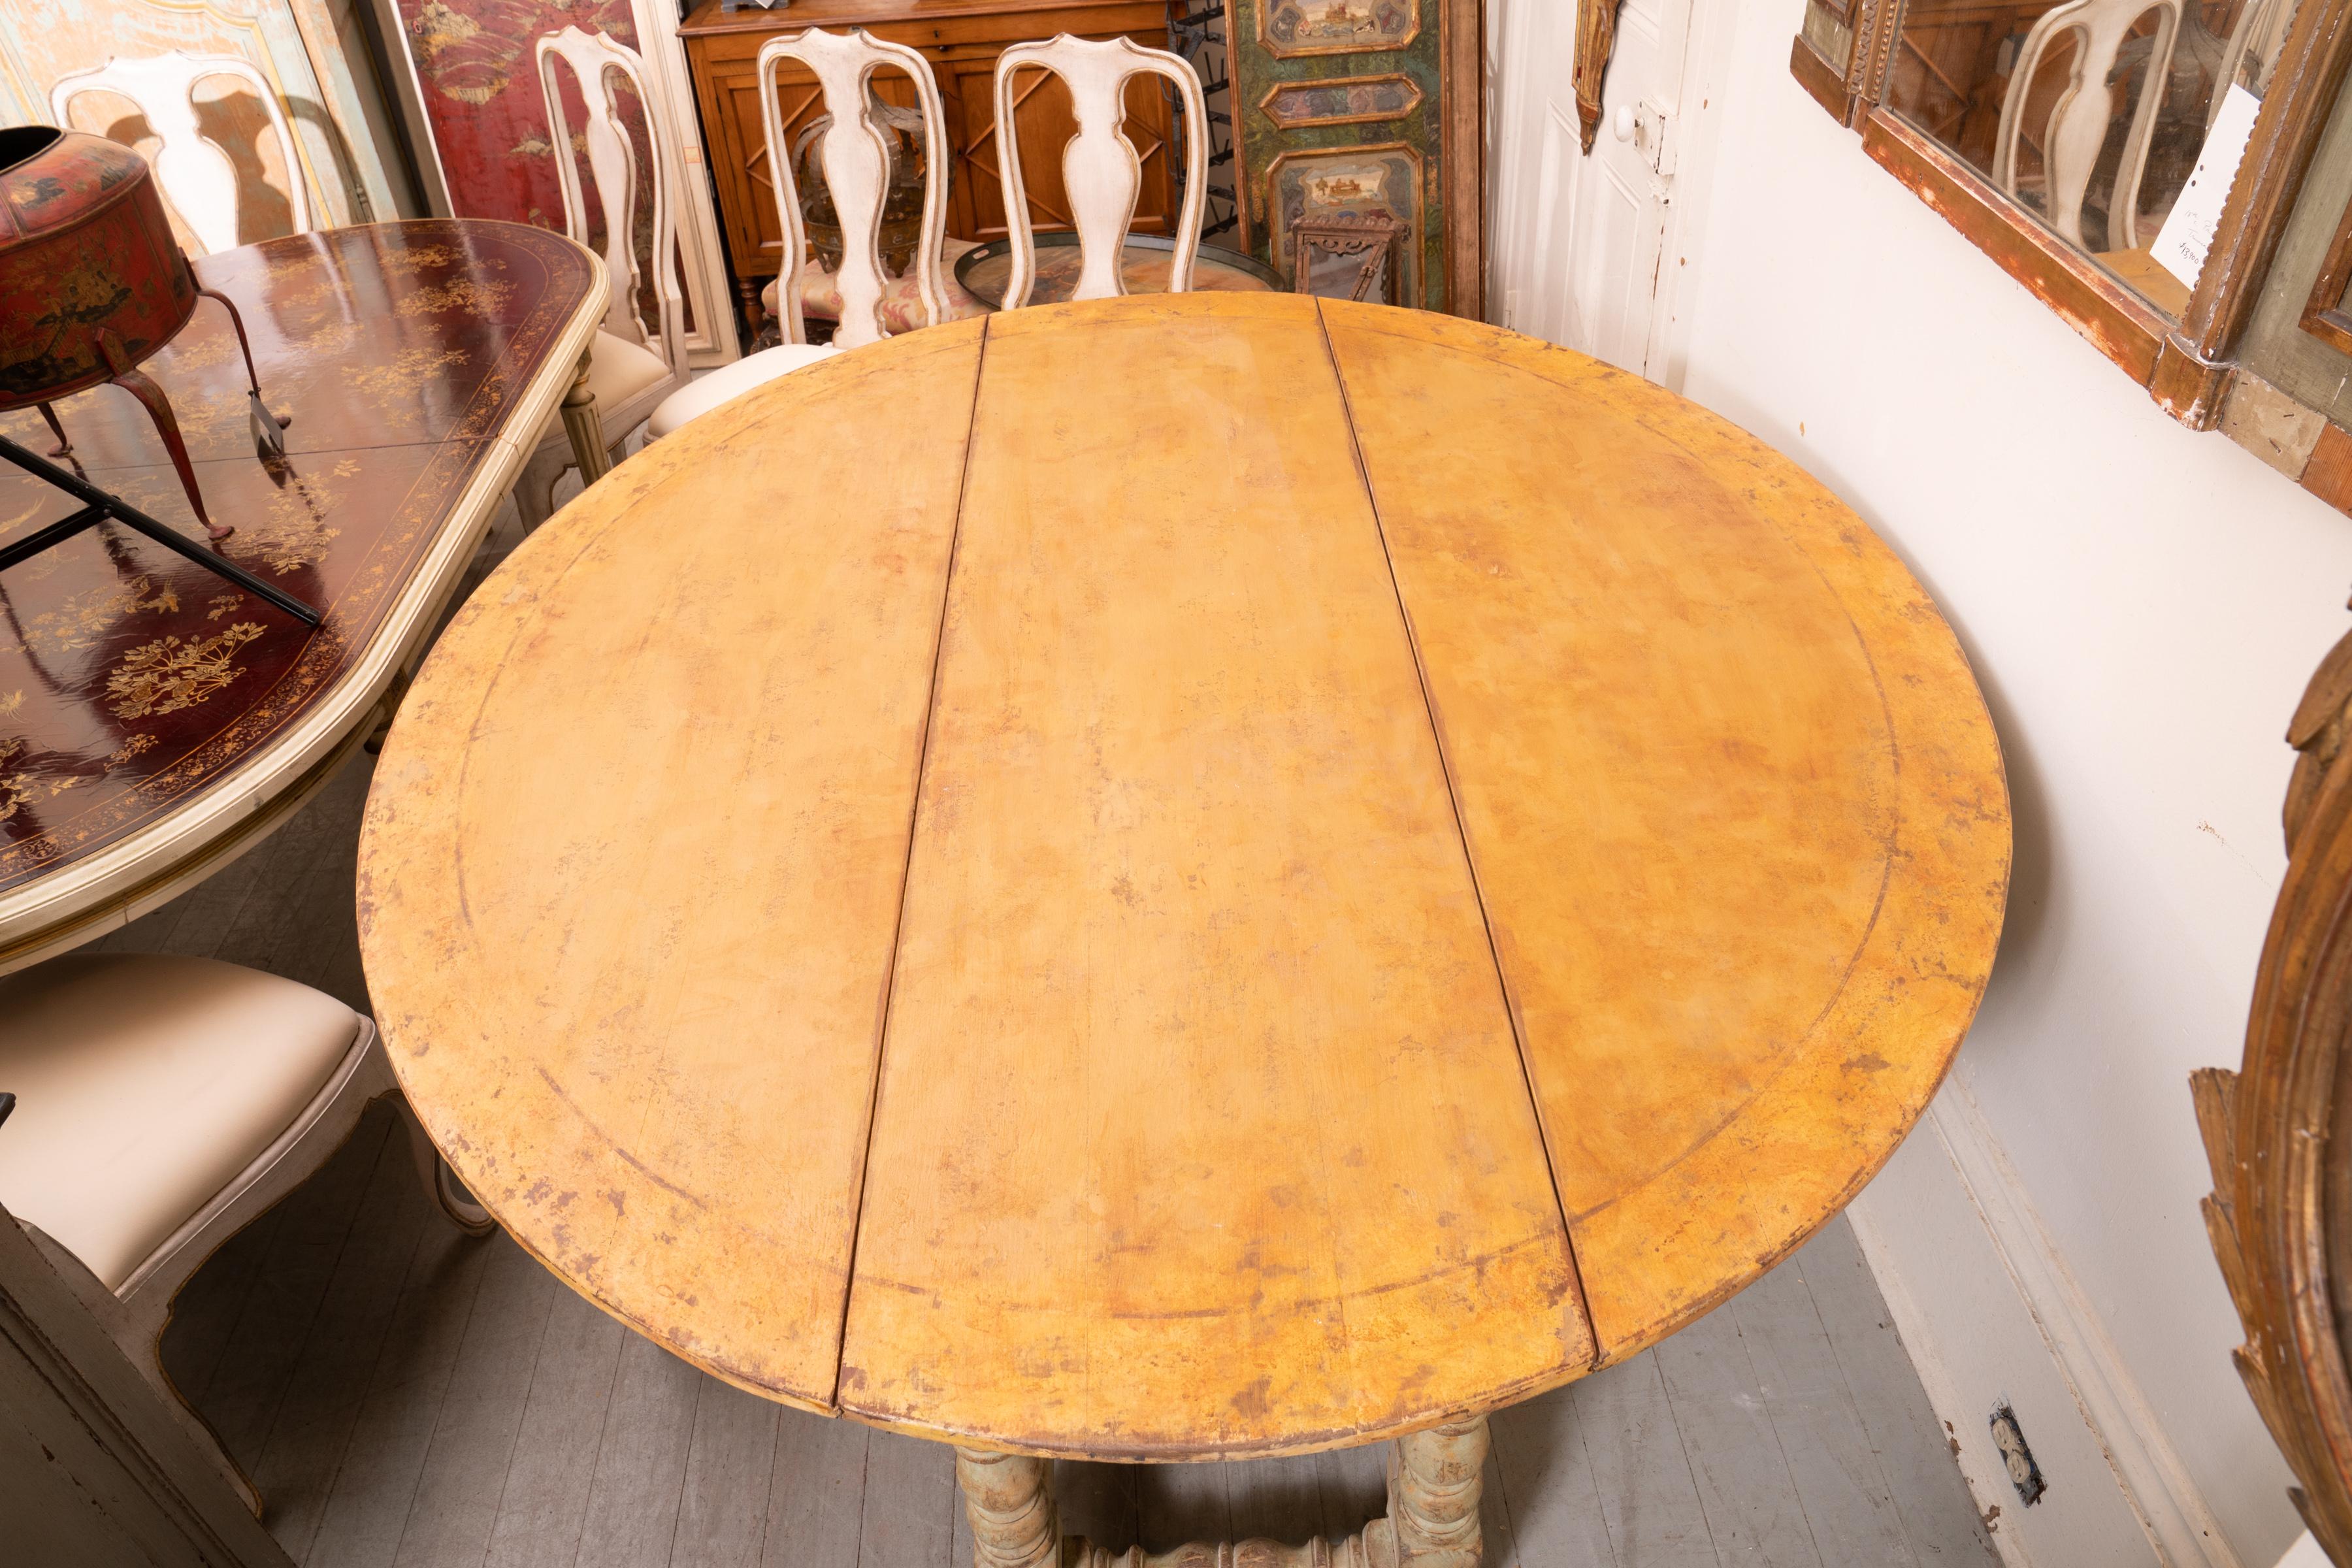 Italian country Gateleg harvest table with leather surface. Beautiful patina and structurally sound table with a fantastic structure. The carved legs support a wonderfully worn and patinated leather work surface. The versatility of this table and